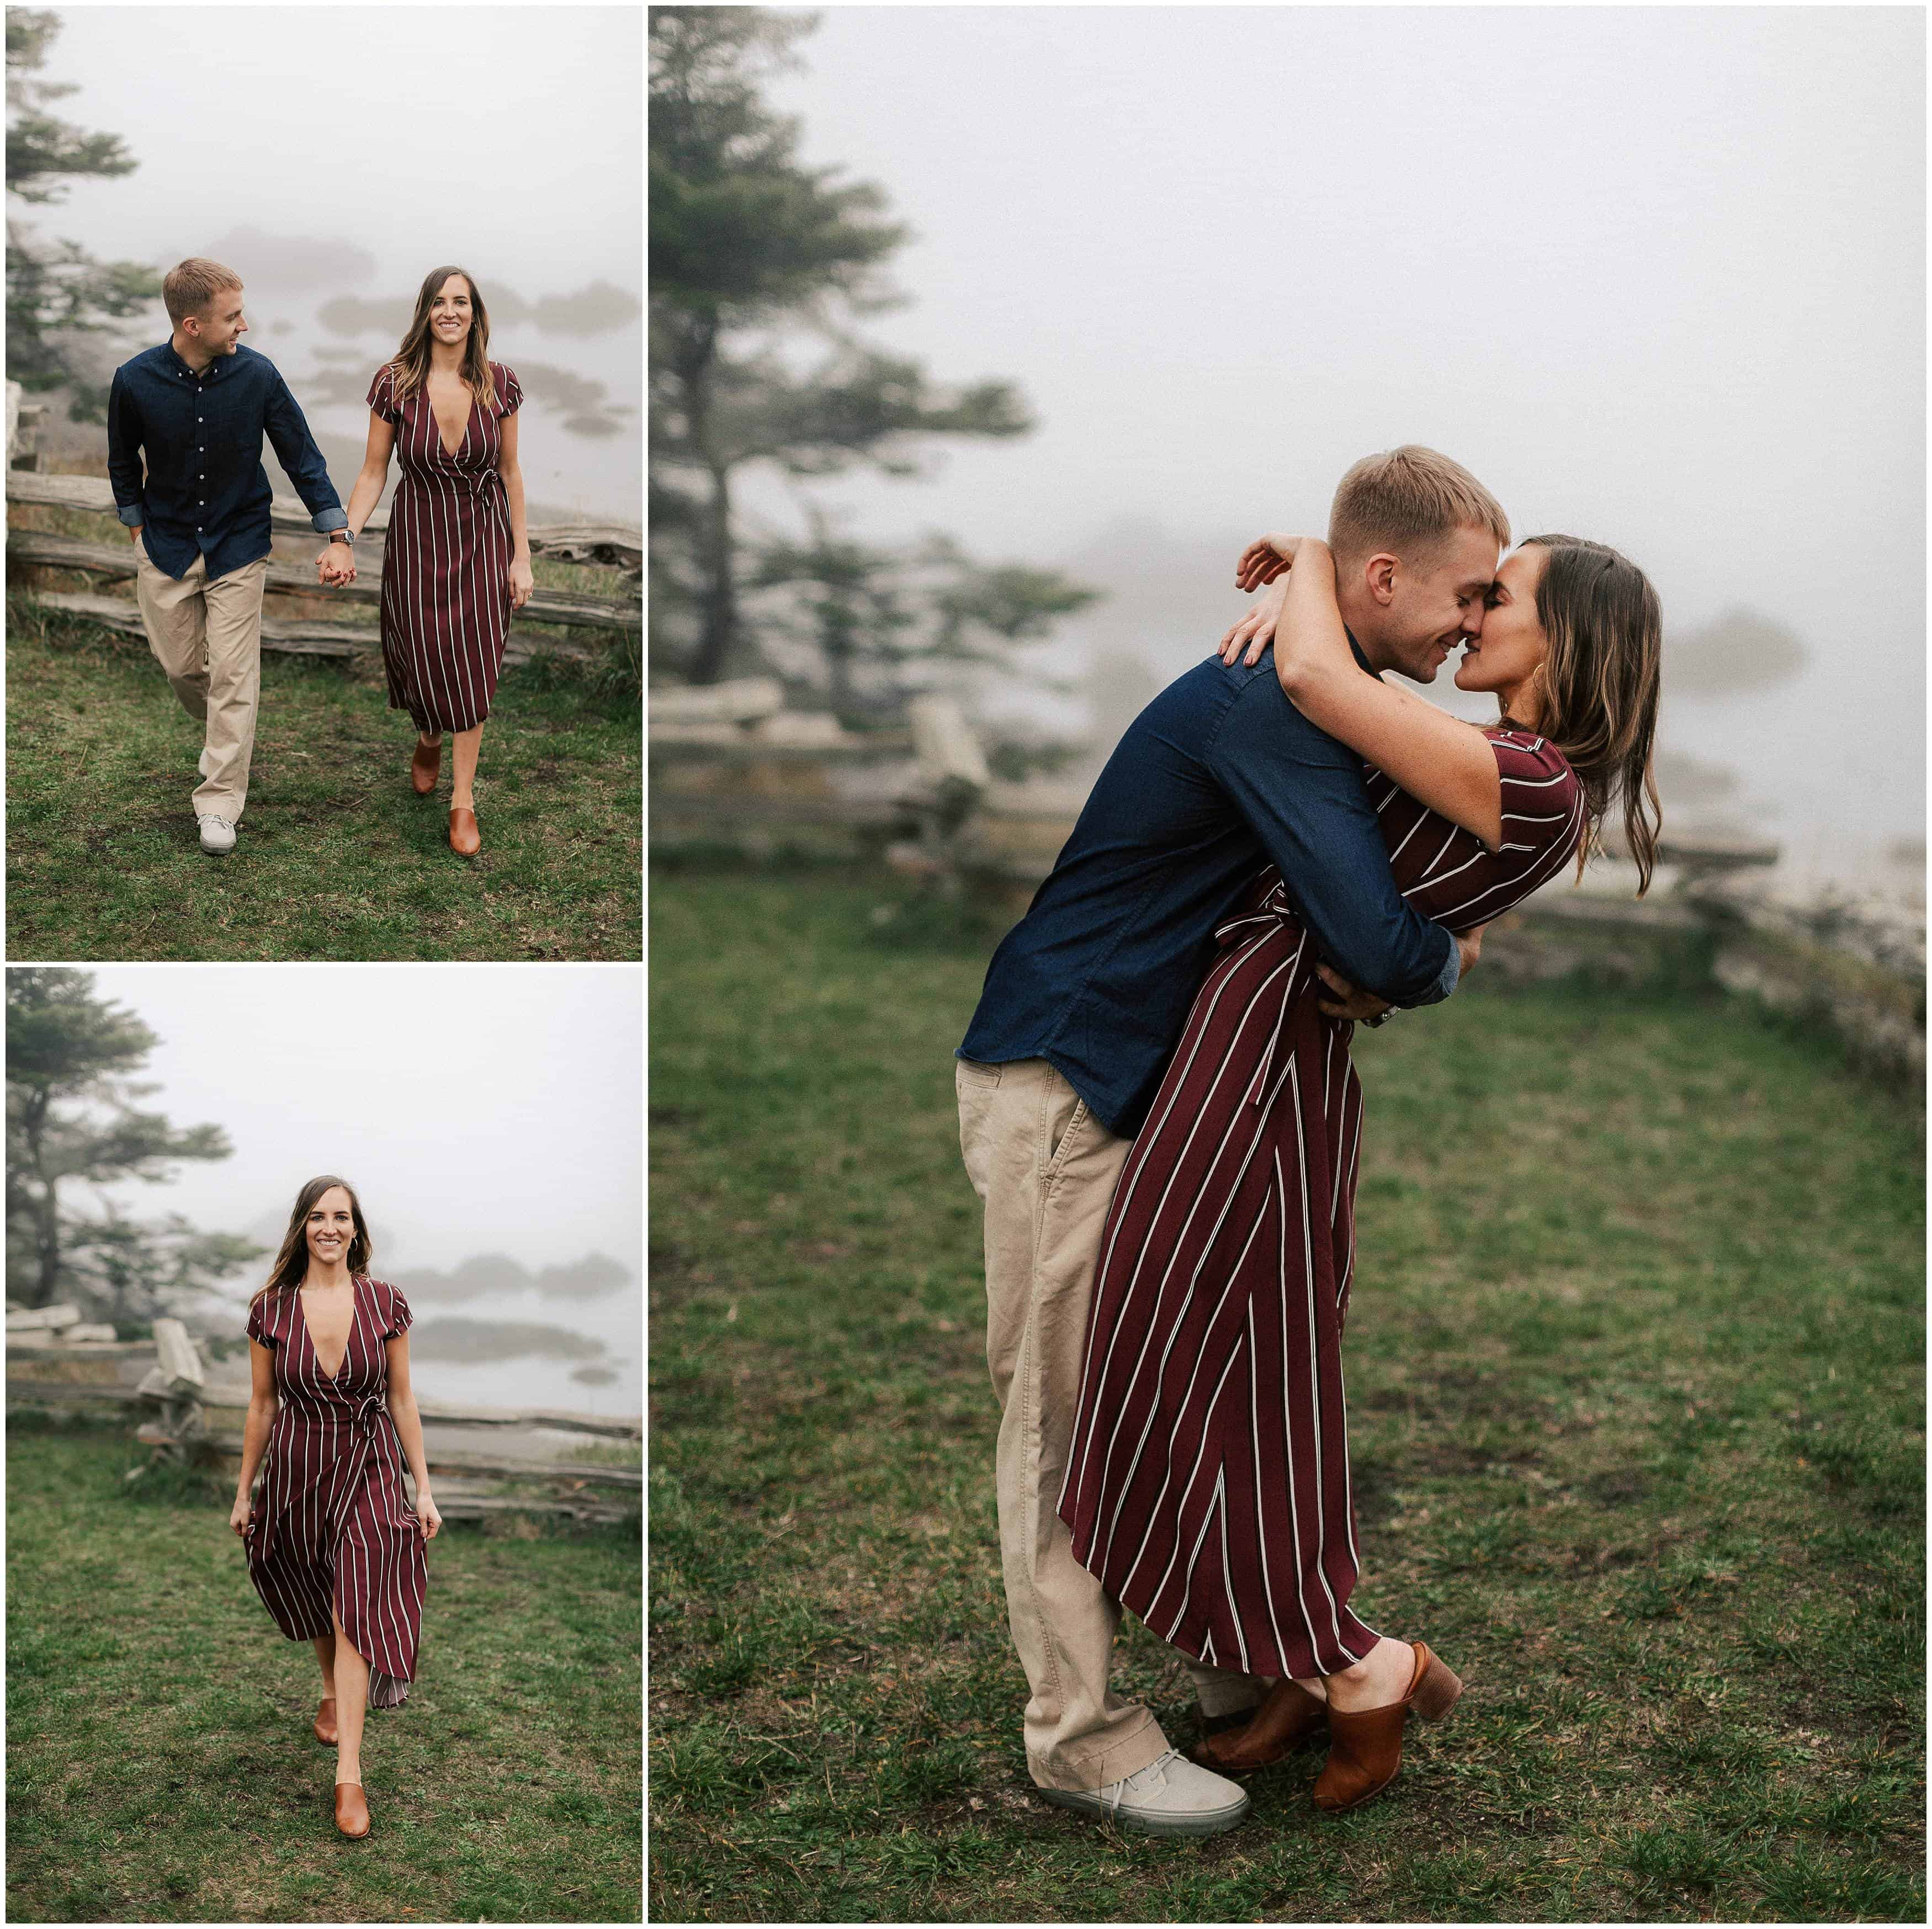 Outdoor engagement photos in the PNW by Kyle Goldie of Luma Weddings